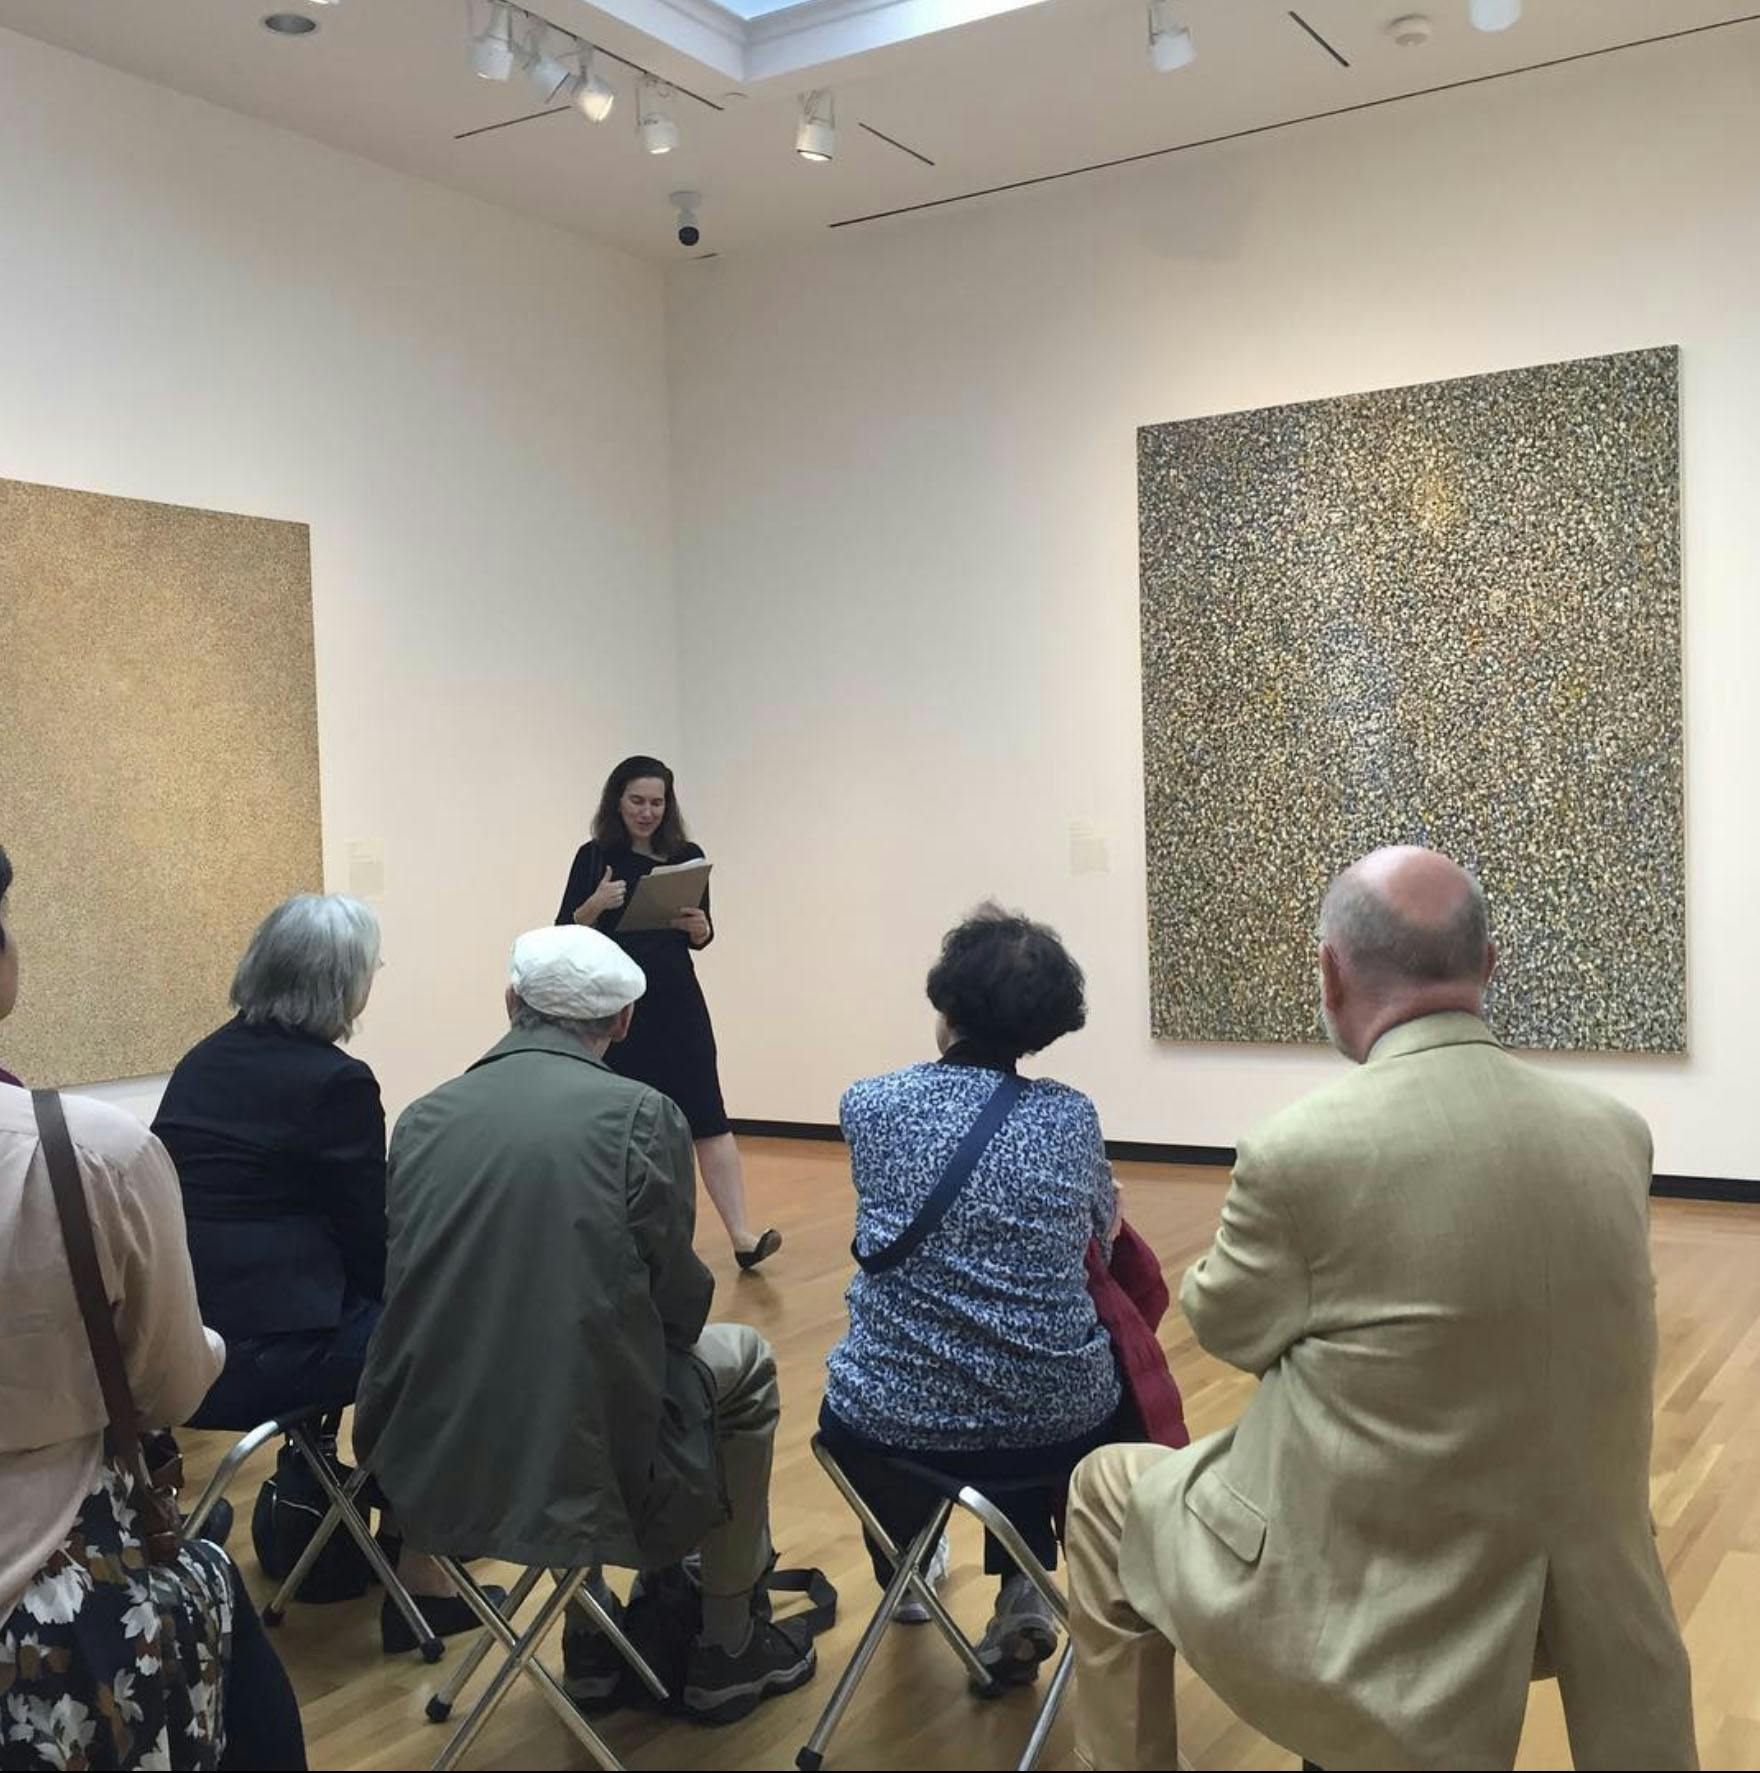 Dr. Anne Collins Goodyear with visitors to the exhibition Richard Pousette-Dart: Painting | Light | Space, Bowdoin College Museum of Art, 2018. – The Richard Pousette-Dart Foundation